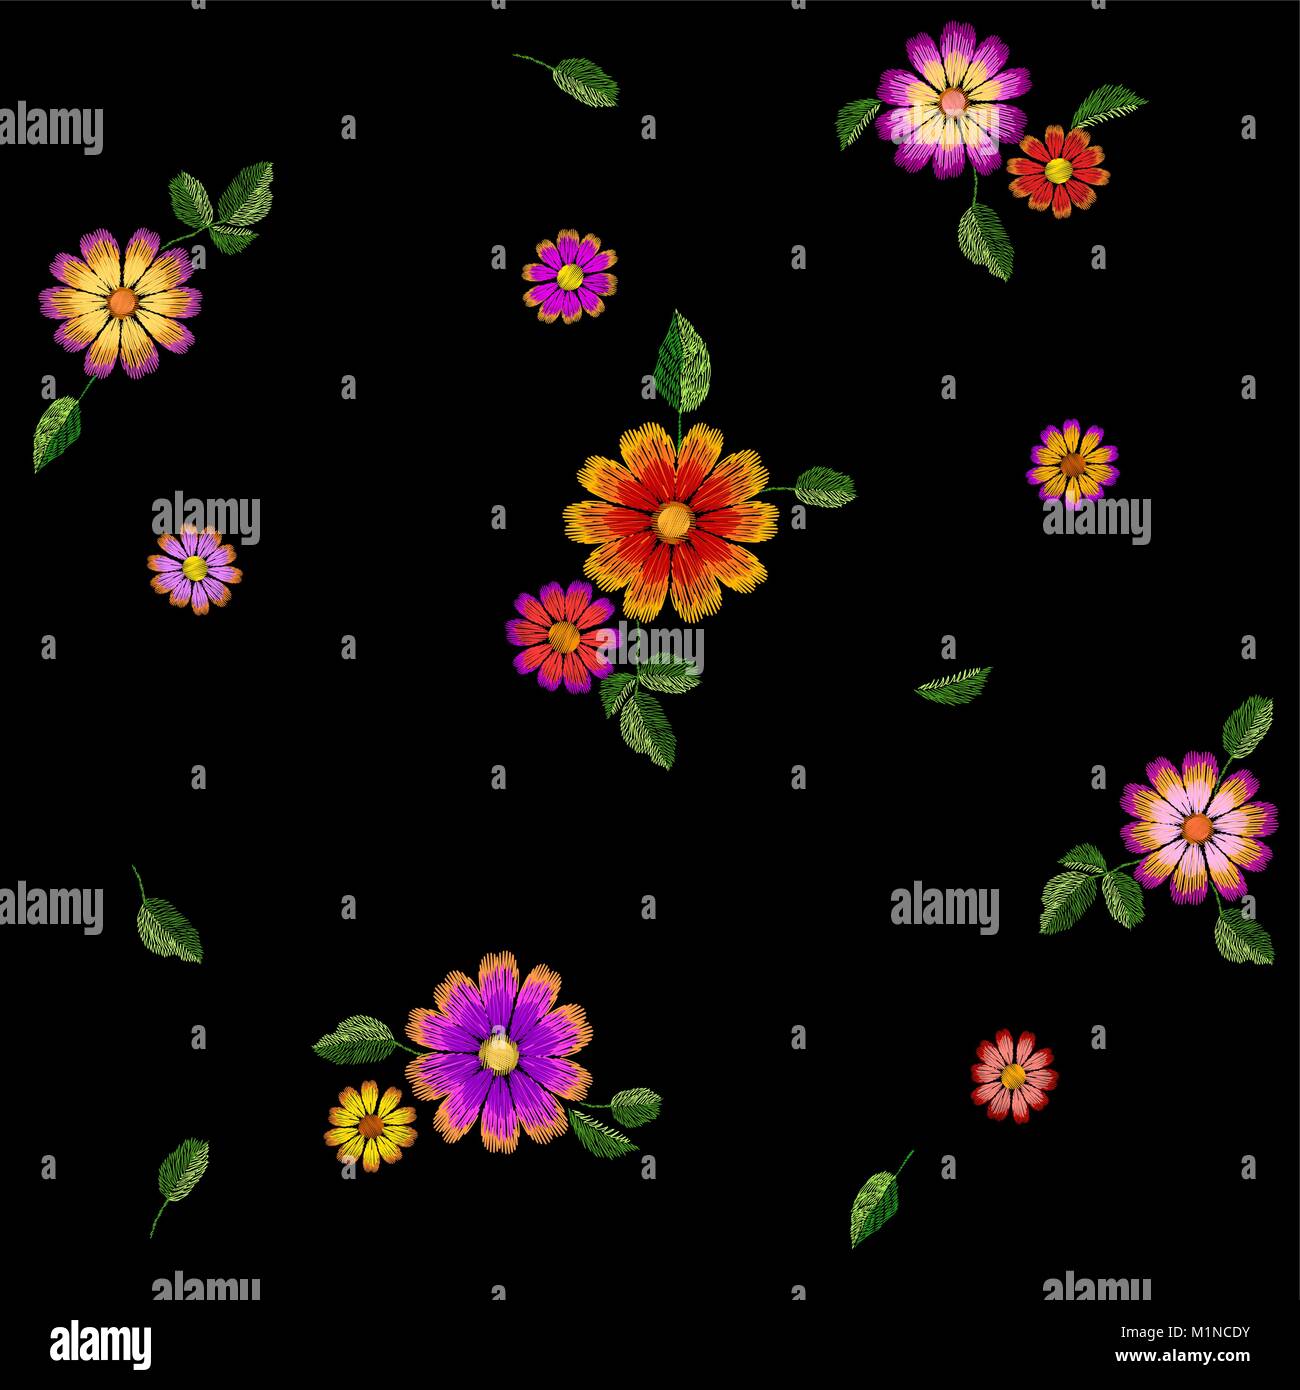 Bright flower embroidery colorful seamless pattern. Fashion decoration stitched texture template. Ethnic traditional daisy field plant leaves textile print design vector illustration Stock Vector